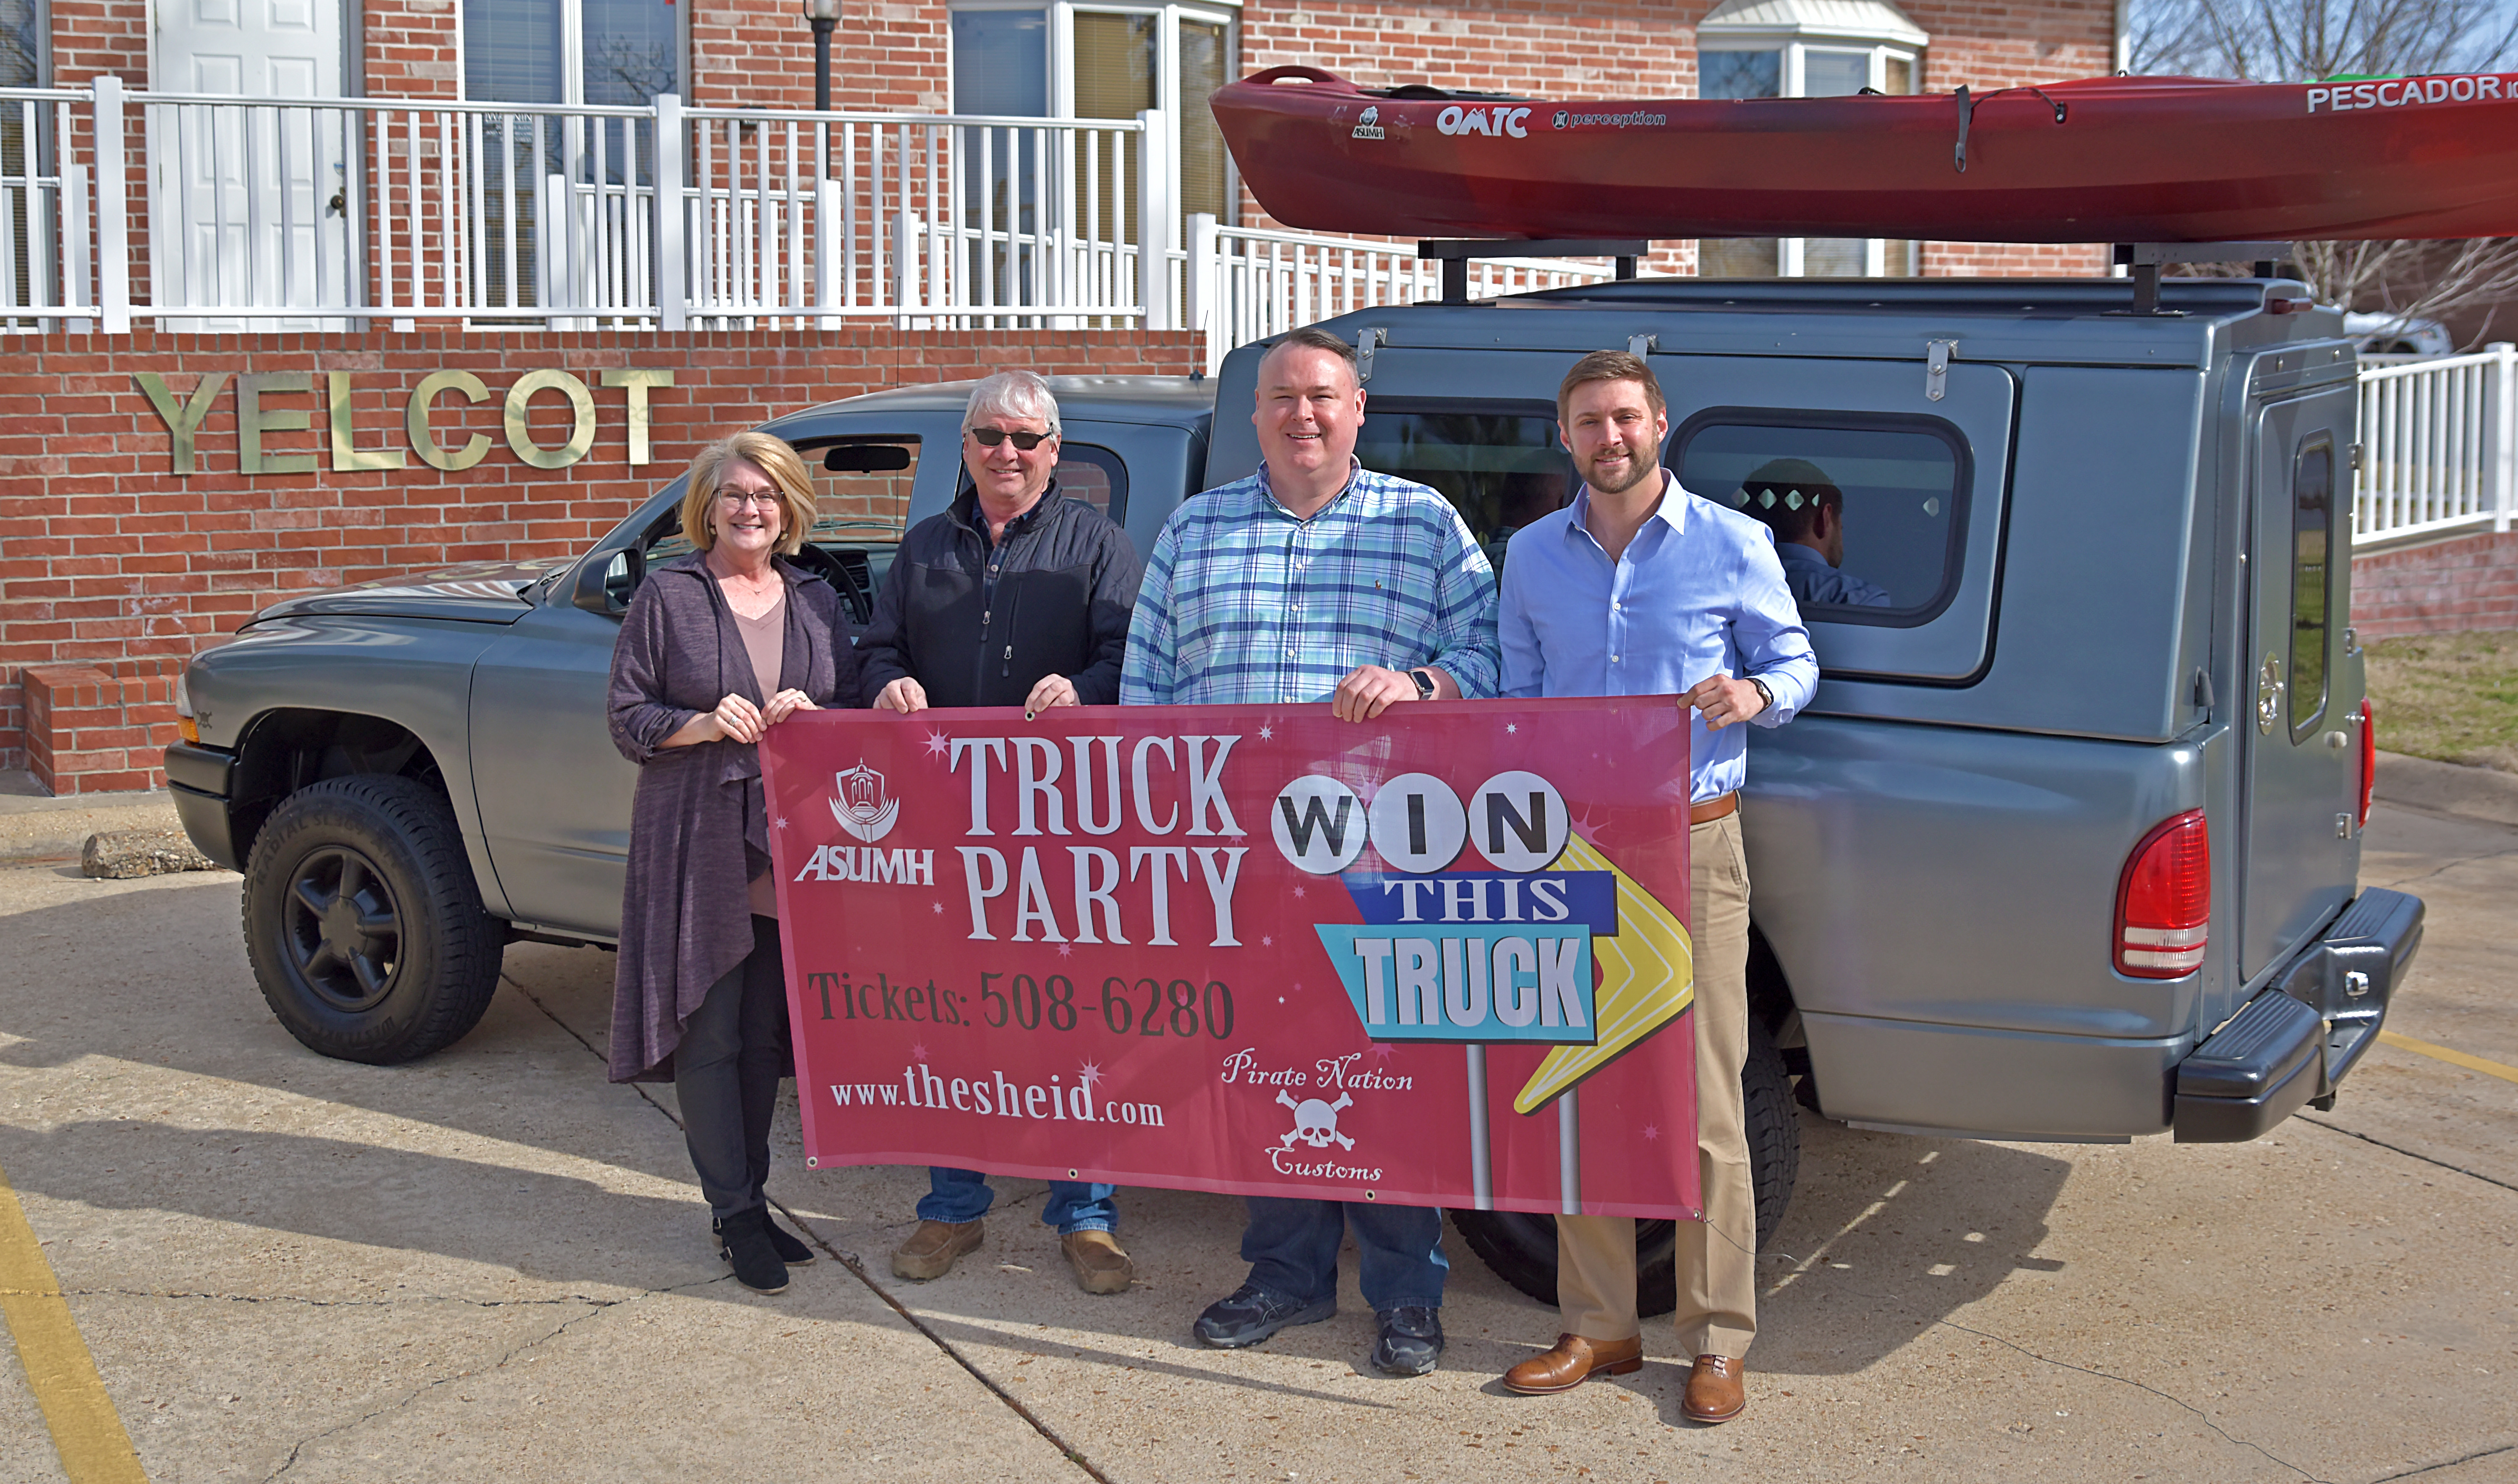 Truck Party 2019